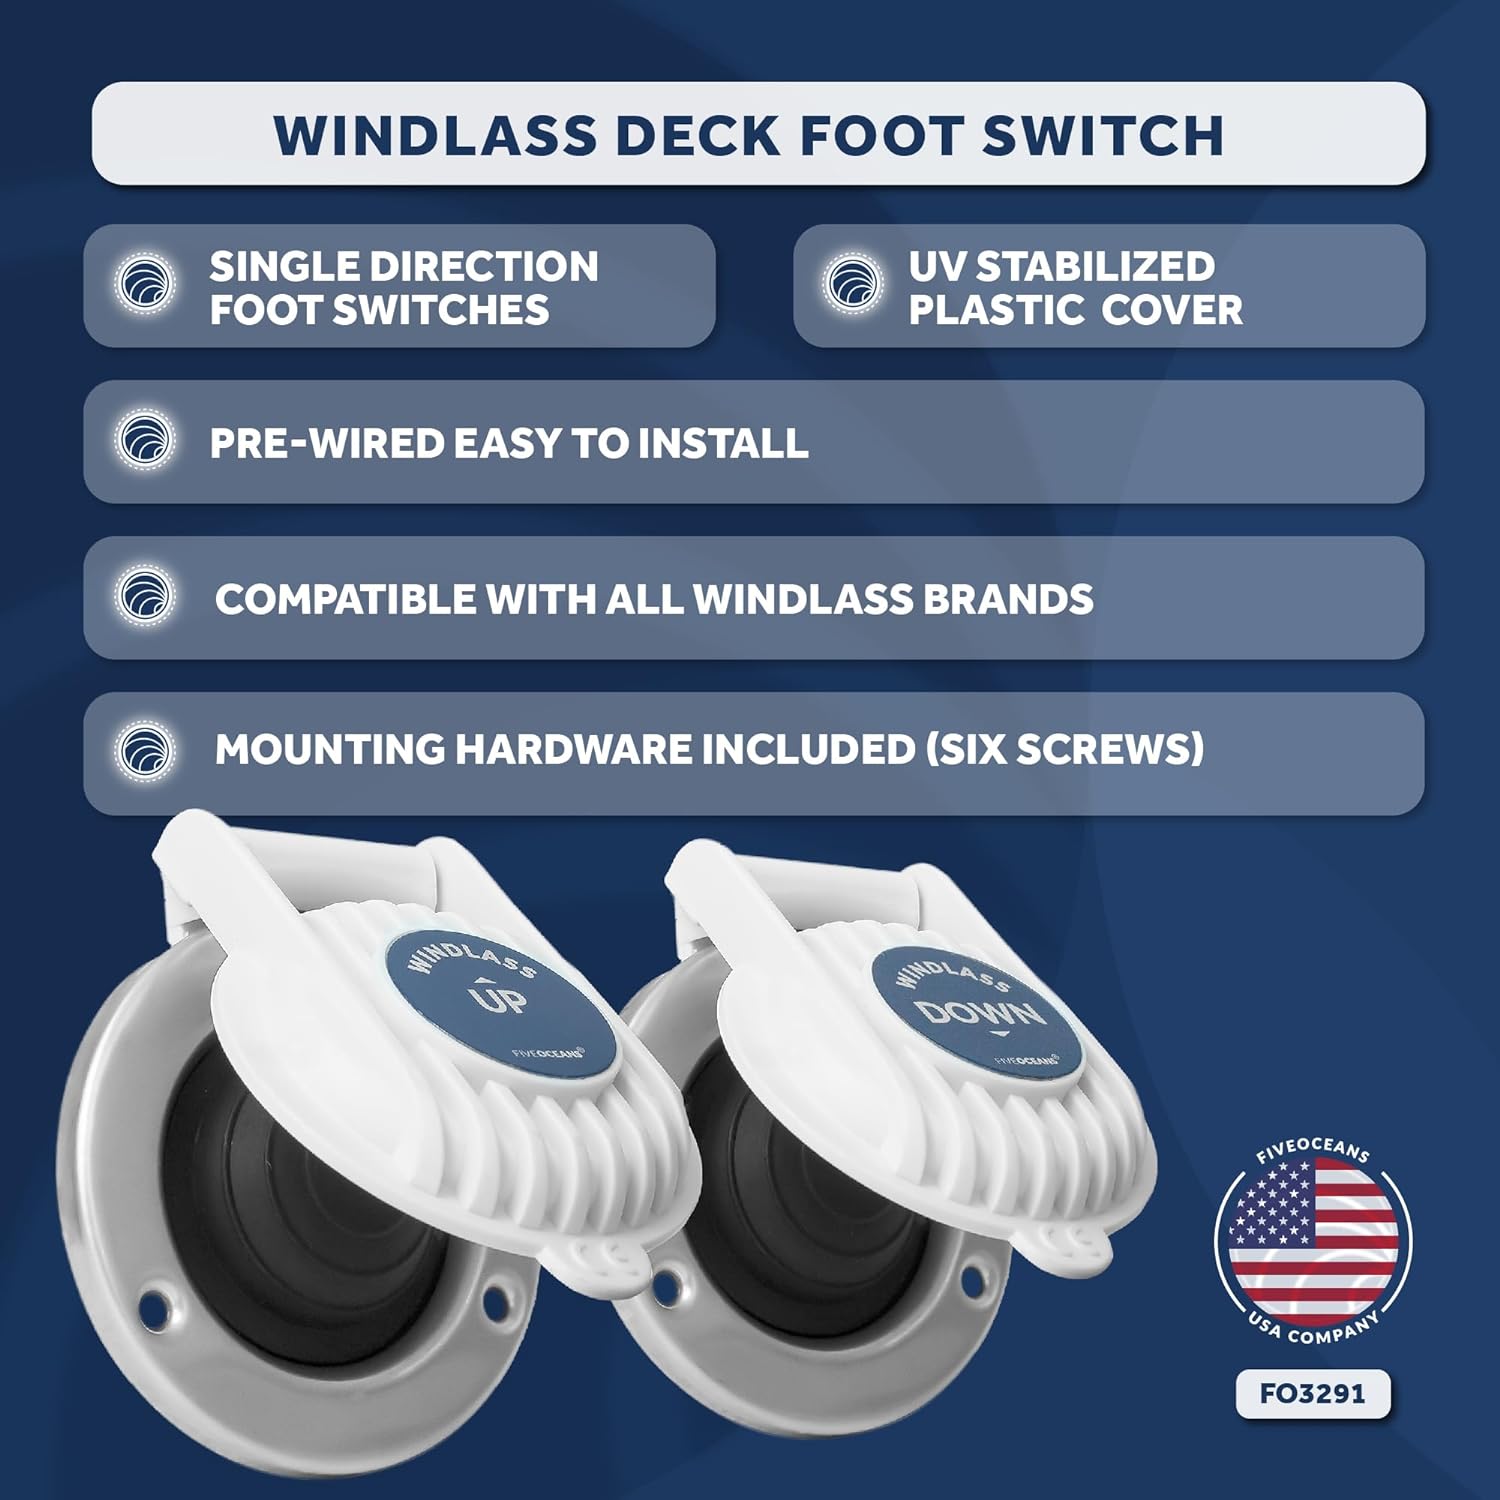 Windlass Deck Foot Switch, Up/Down Single Direction Switches - Five Oceans - 0